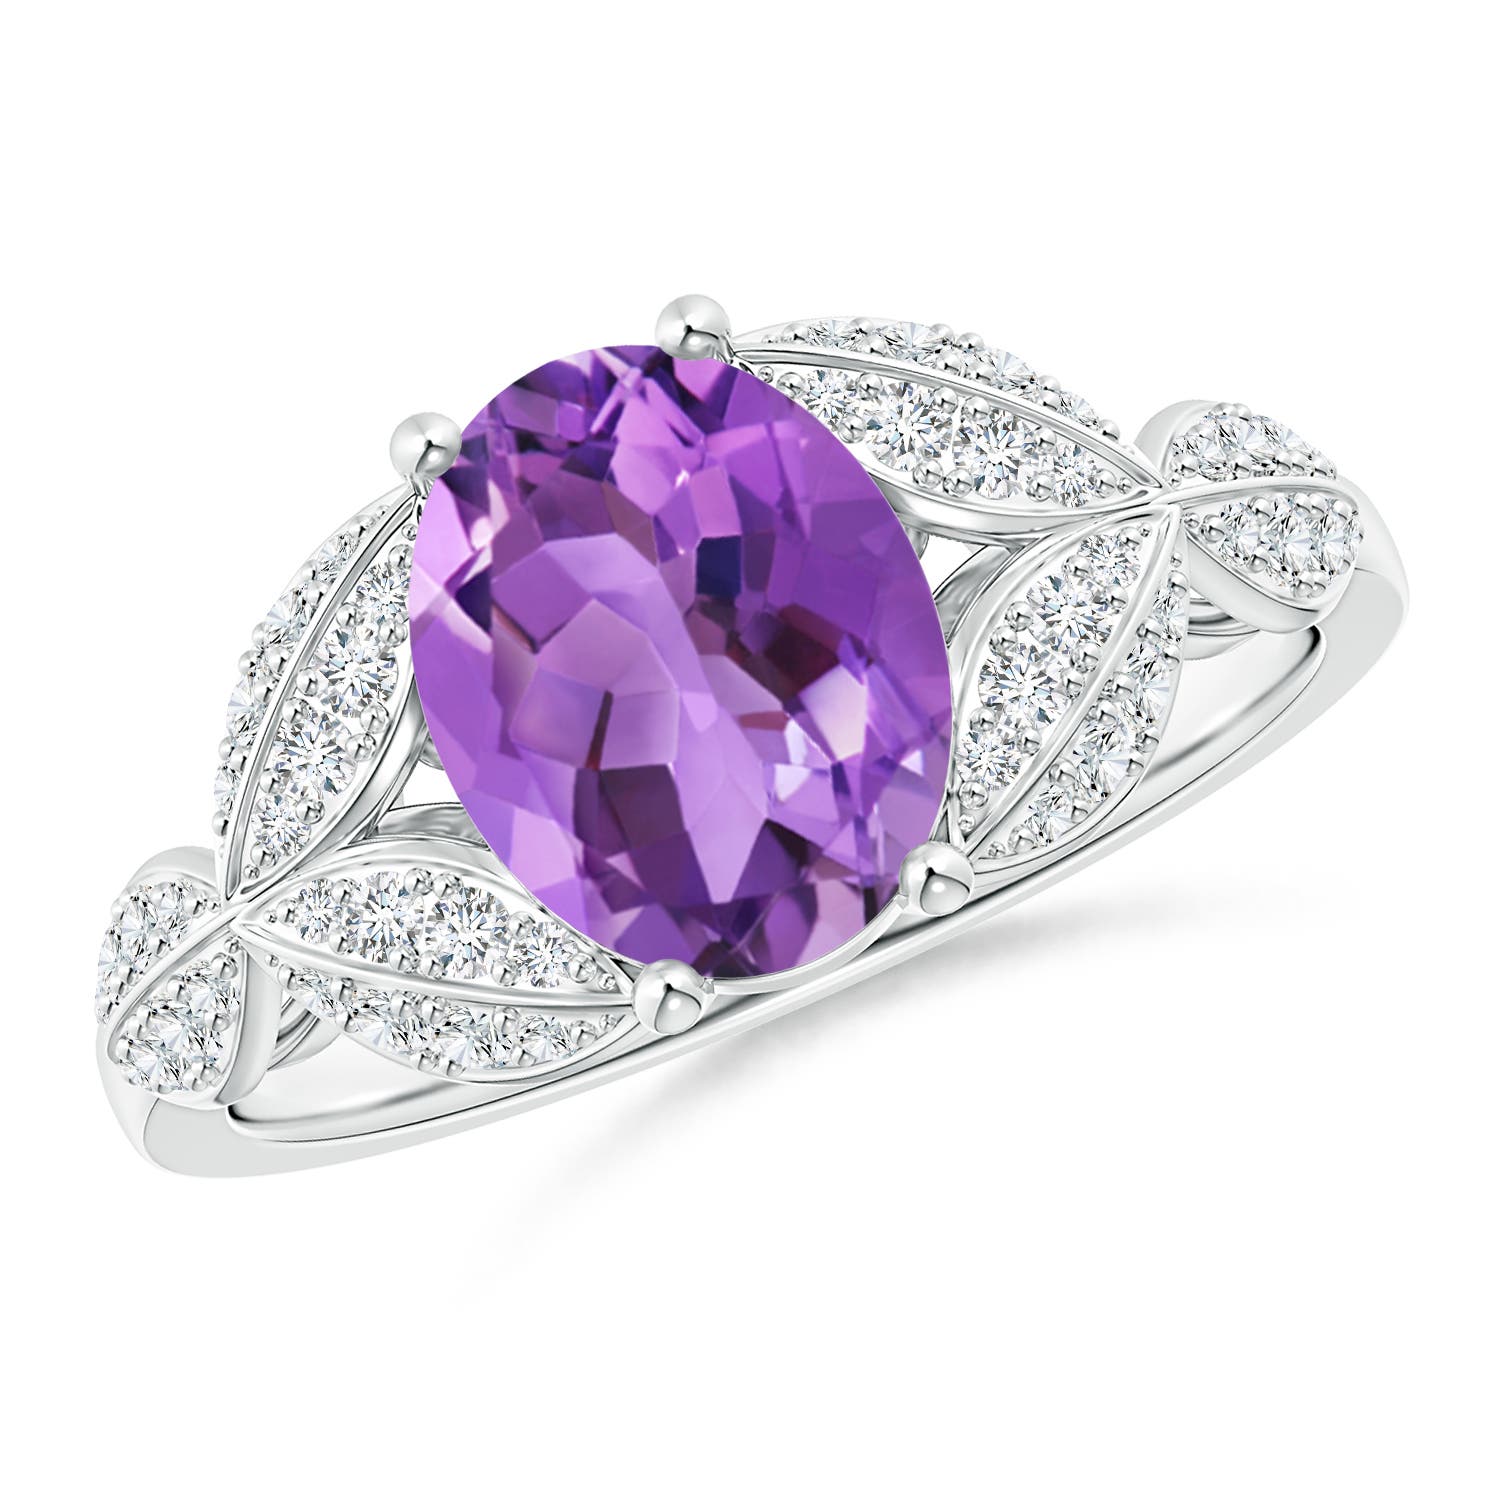 AA - Amethyst / 1.88 CT / 14 KT White Gold